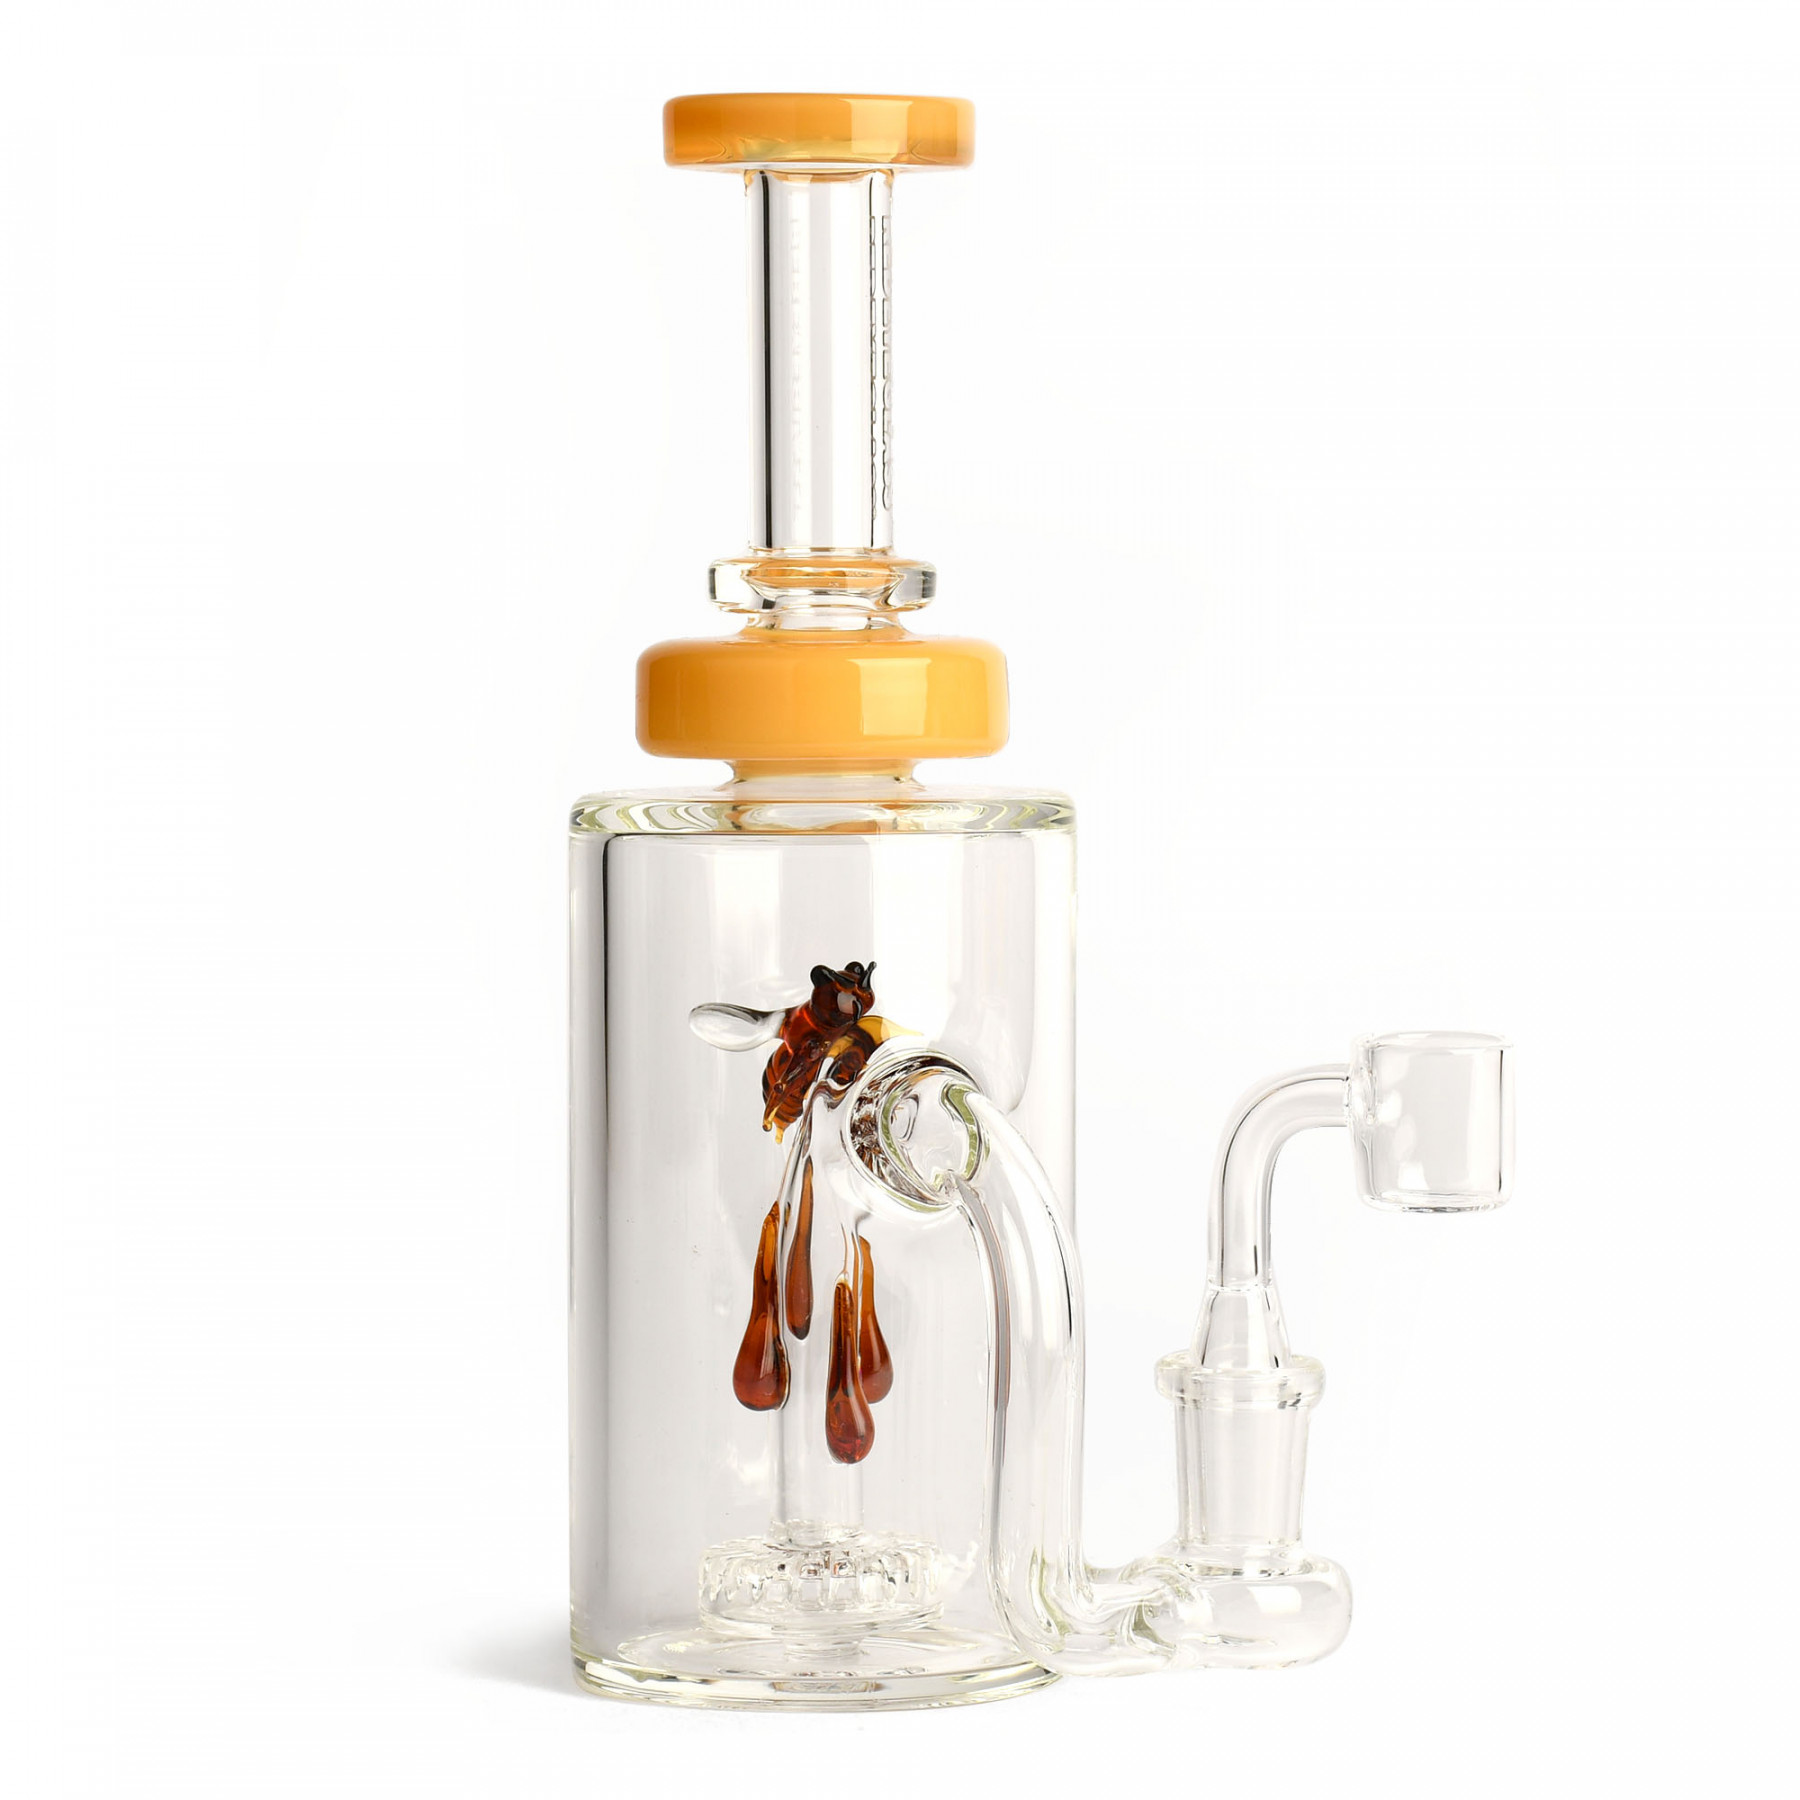 8.5" Apiary Concentrate Rig